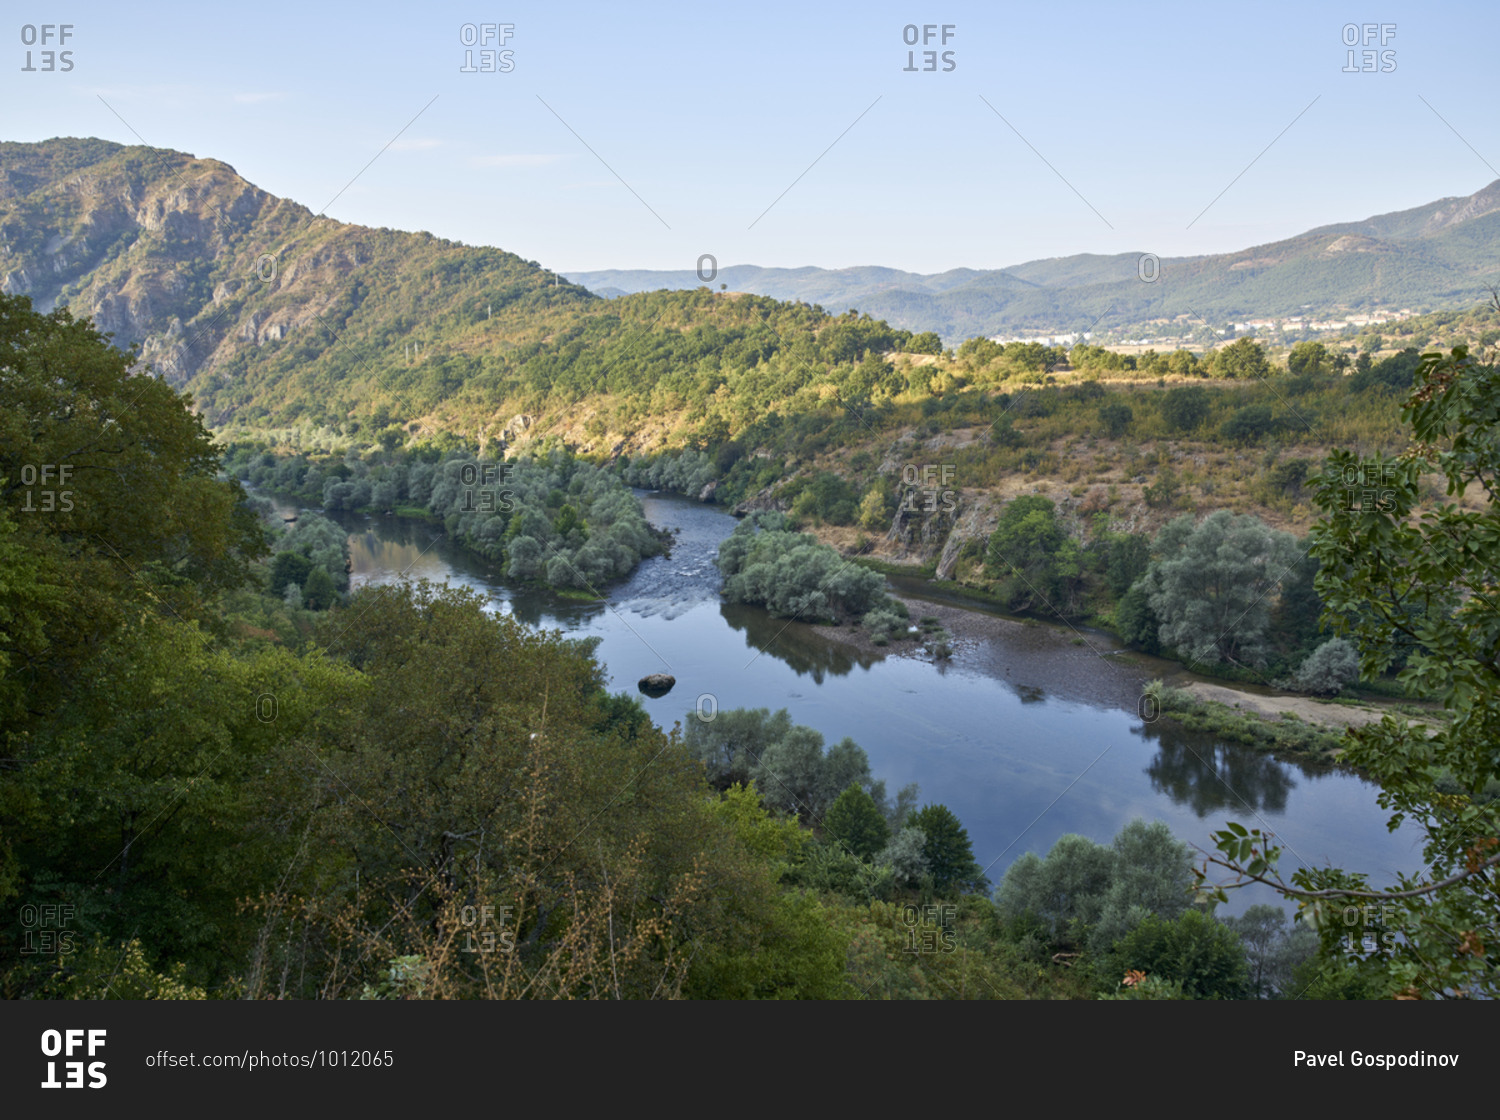 Bird's eye view over the Arda River in the Eastern Rhodope Mountains, Bulgaria